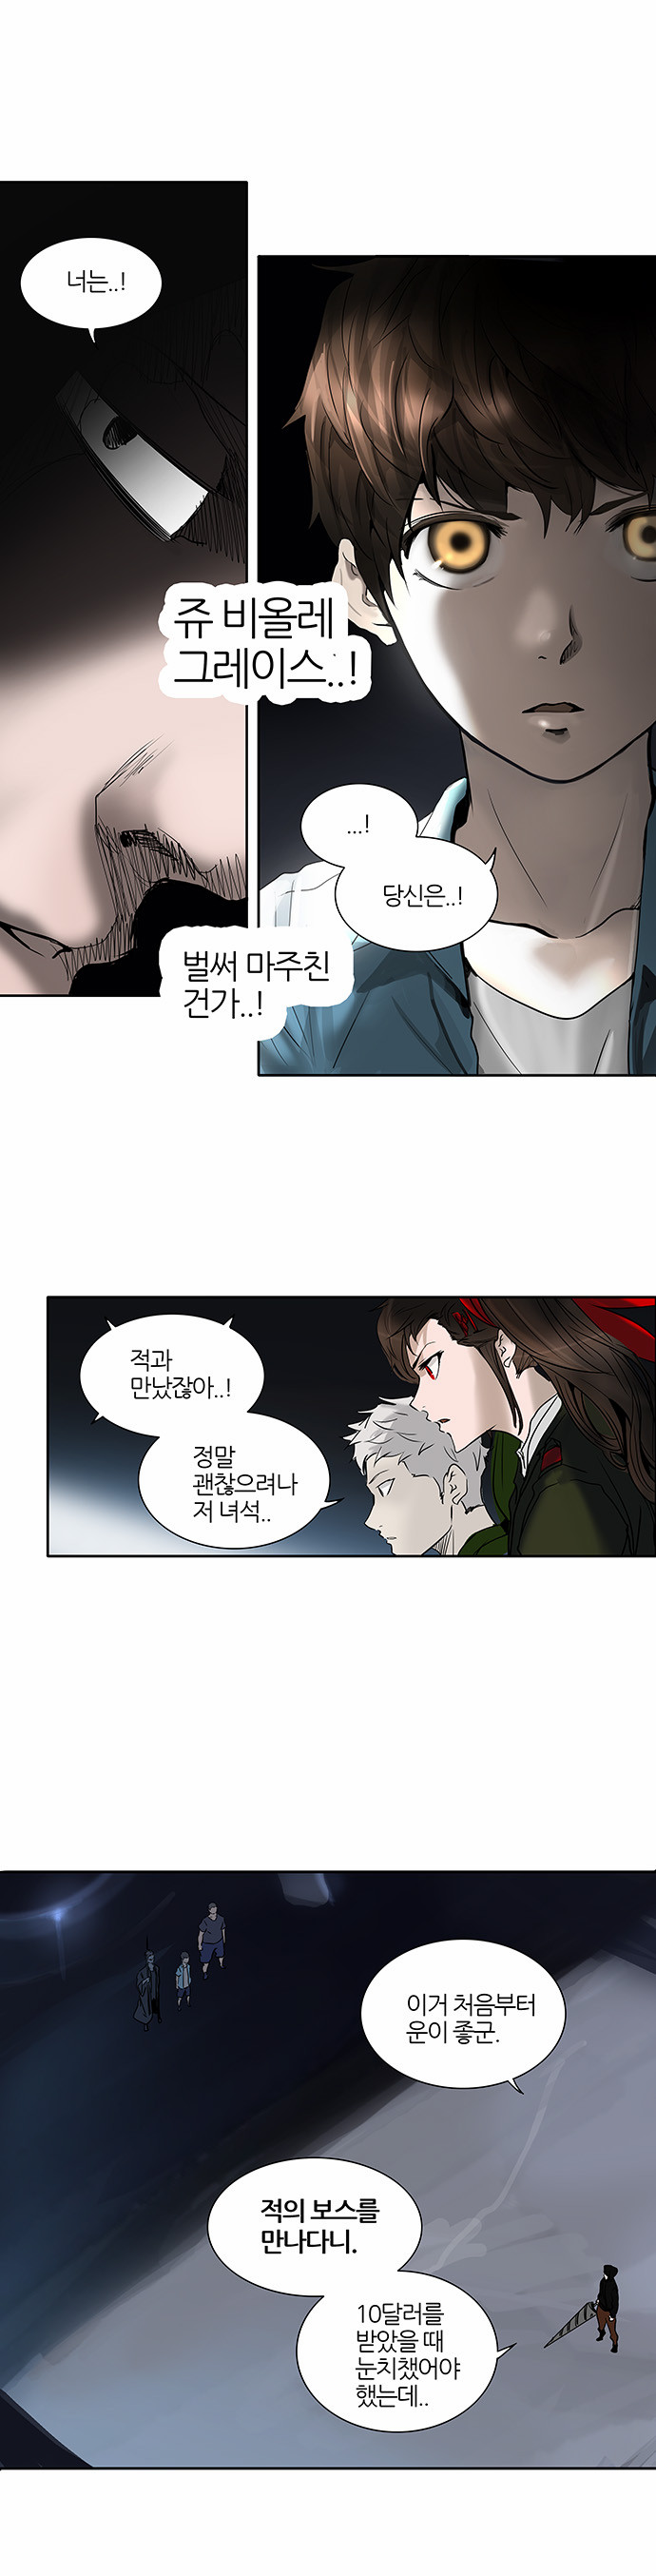 Tower of God - Chapter 258 - Page 1